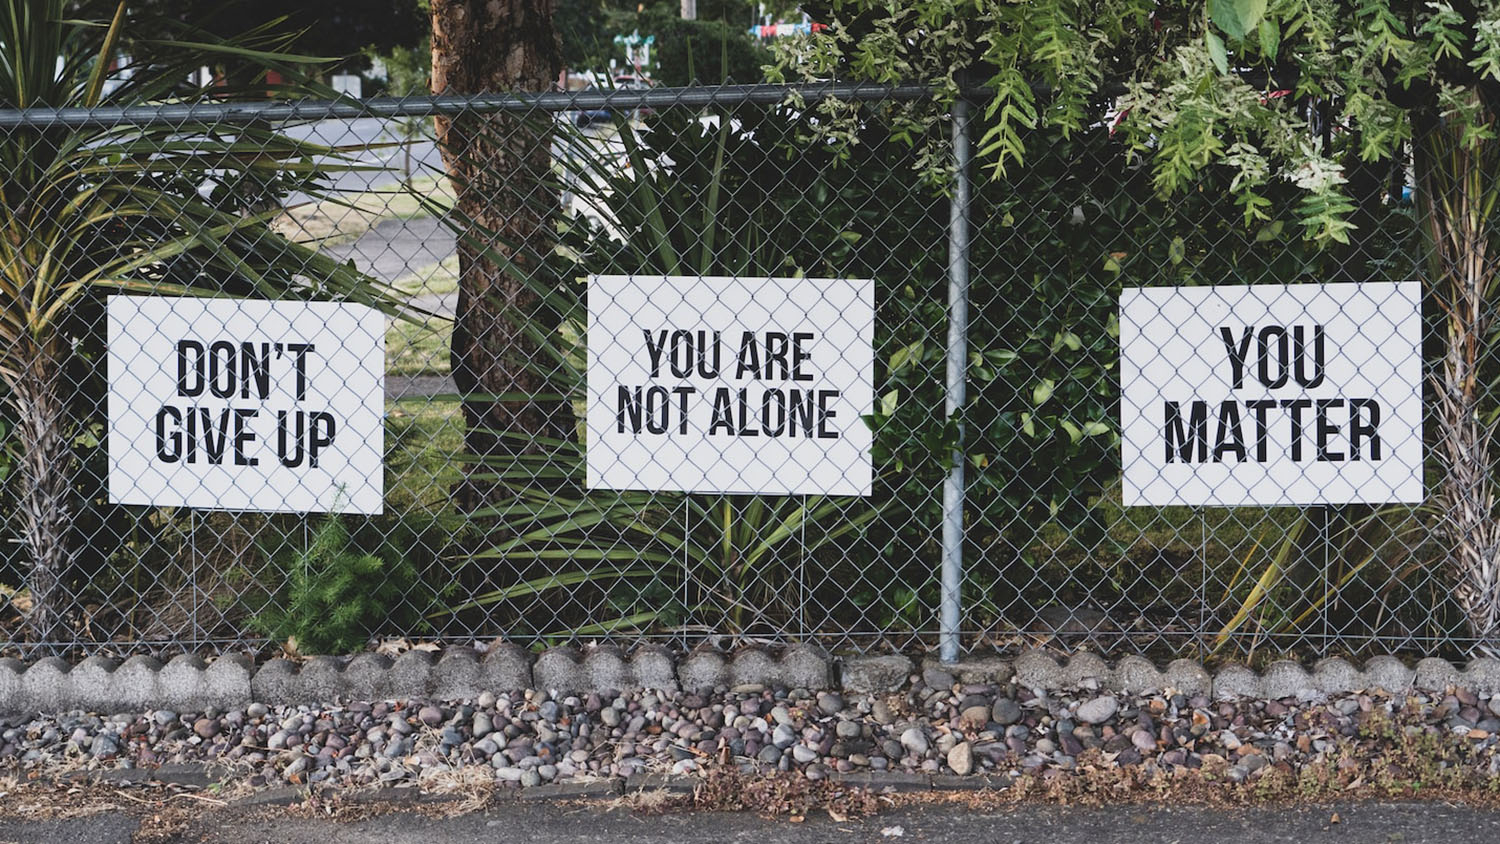 three signs are attached to a chain link fence. The signs read: "Don't Give Up", "You Are Not Alone", and "You Matter".